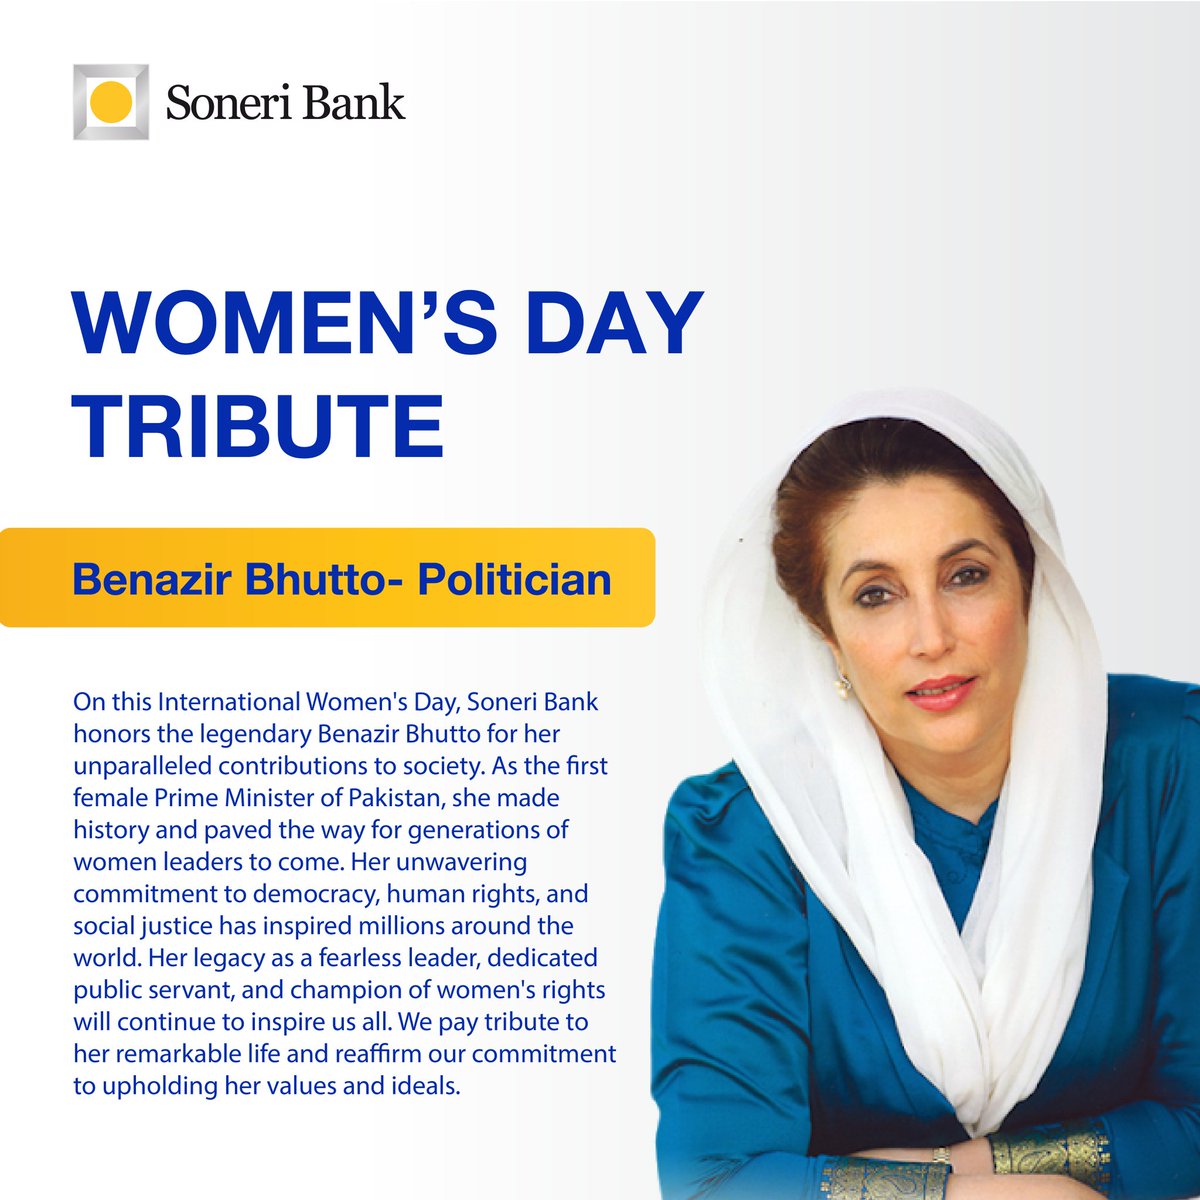 Soneri Bank pays tribute to the most influential Women  of Pakistan! 
Benazir Bhutto was a great politician, epitome of courage, foresight and charisma. Her struggle for freedom and justice for underprivileged citizens will last forever.

#SoneriBank #RoshanHarQadam #IWD23